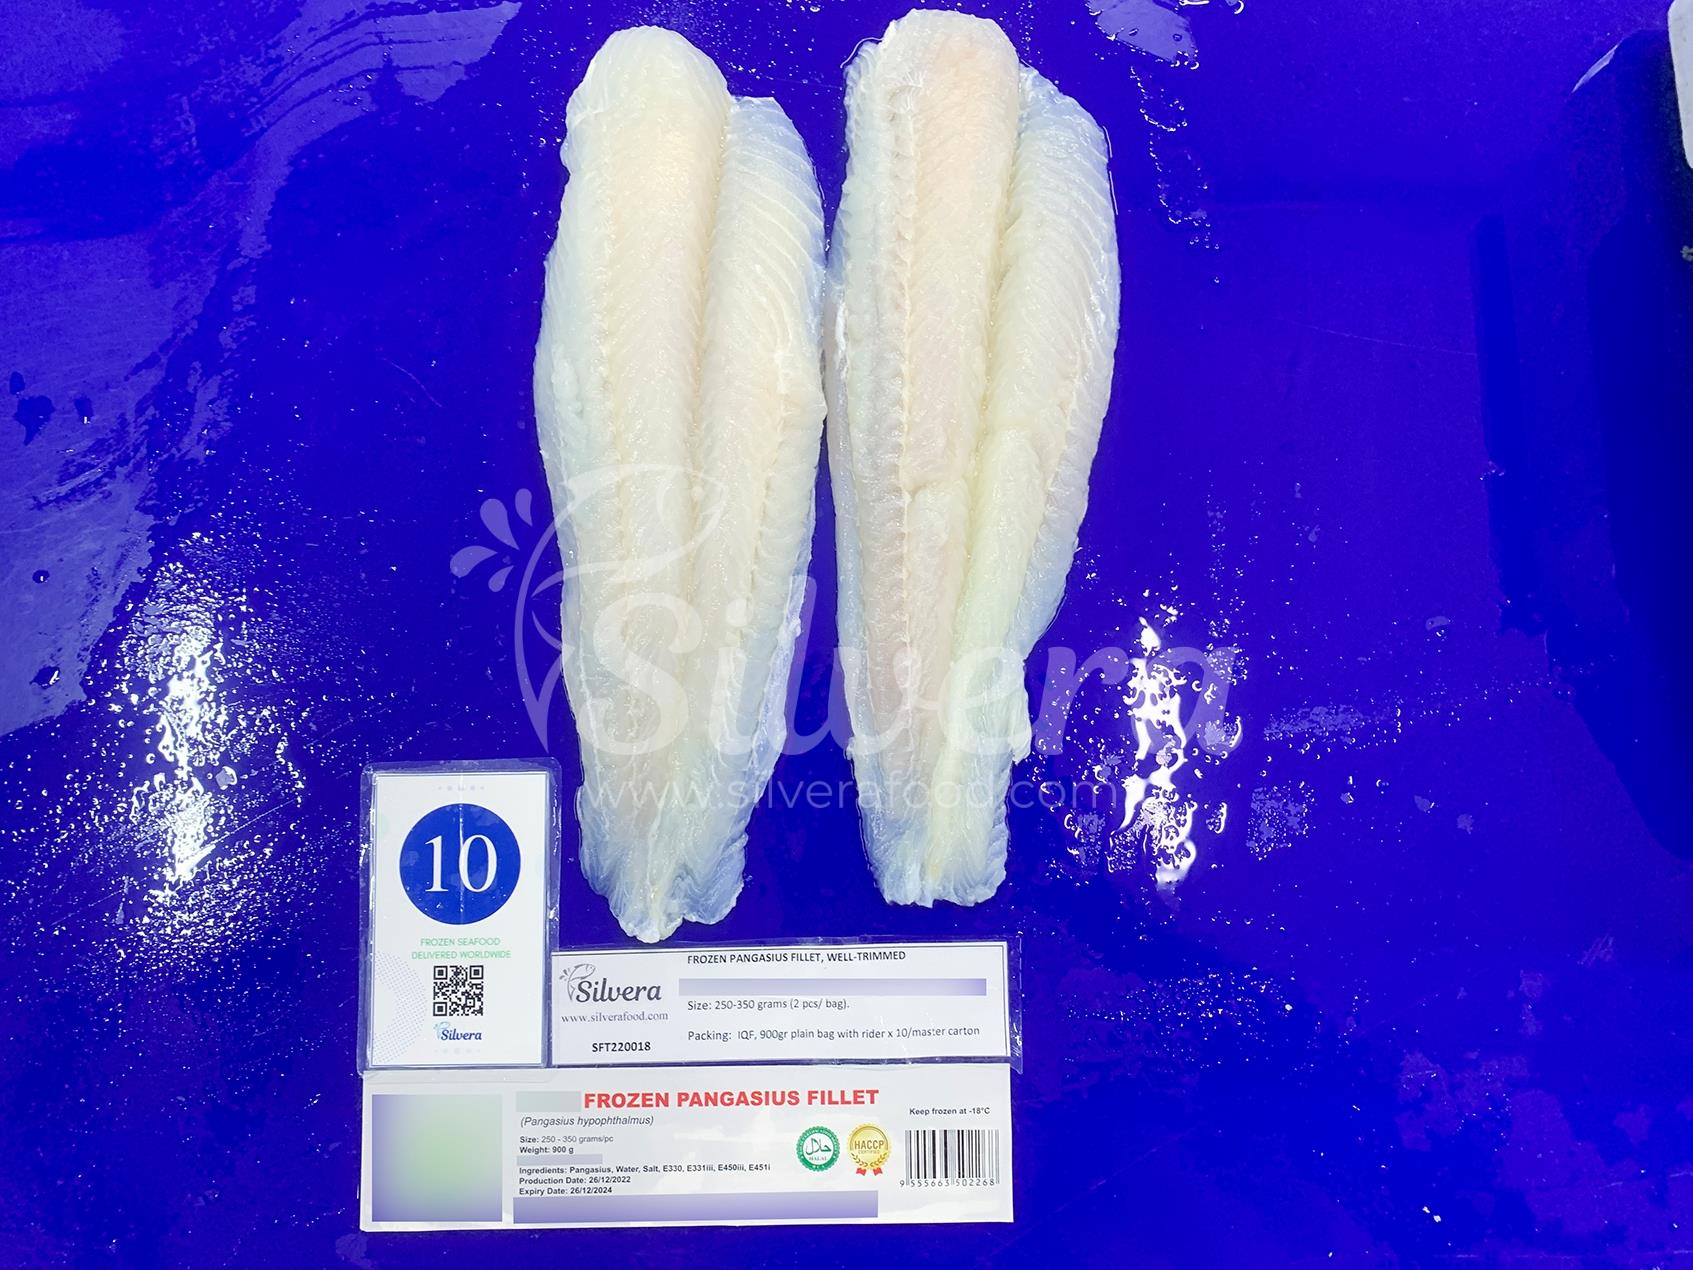 Defrosted Pangasius fillets